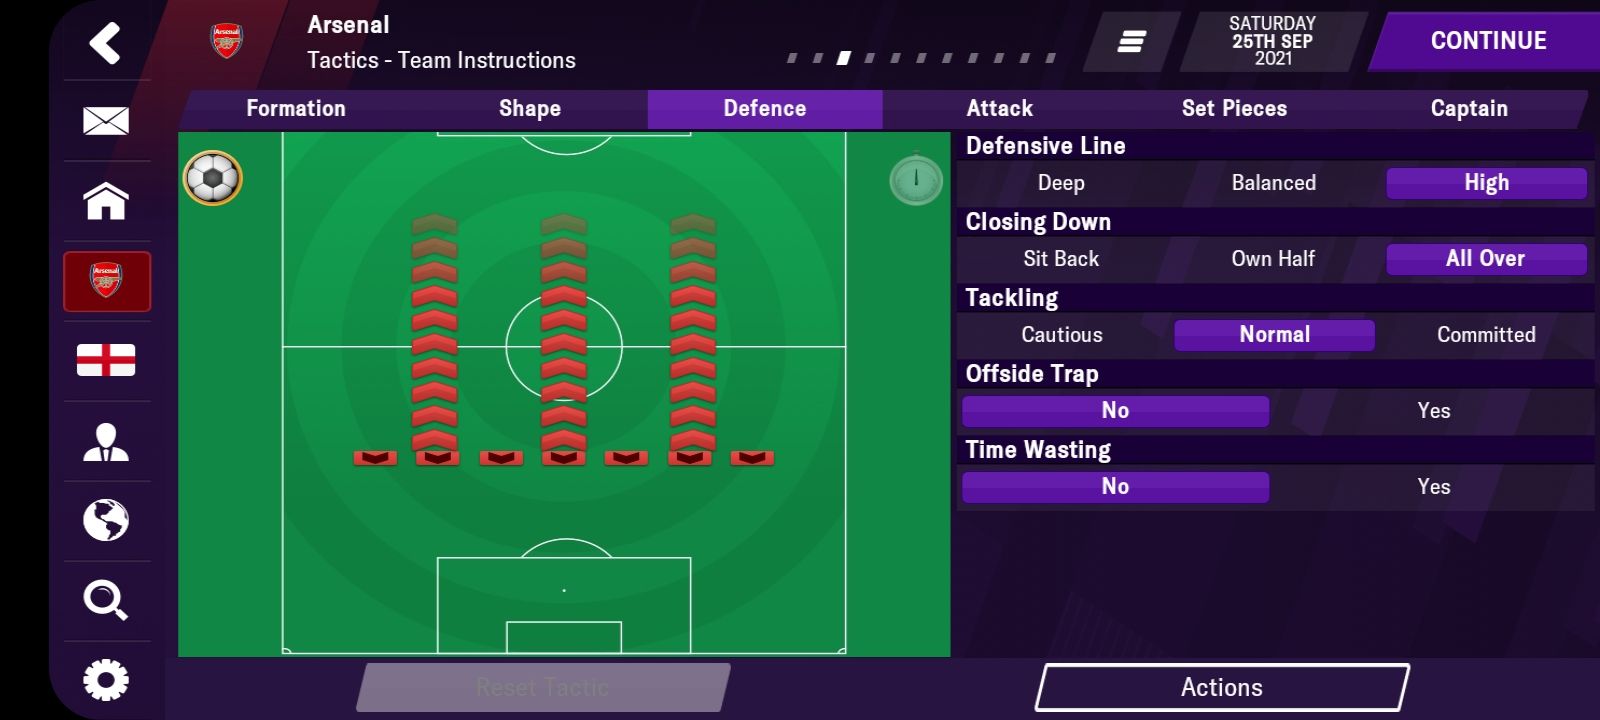 FMM22 - New Features + Screenshots - Football Manager 2022 Mobile - FMM Vibe